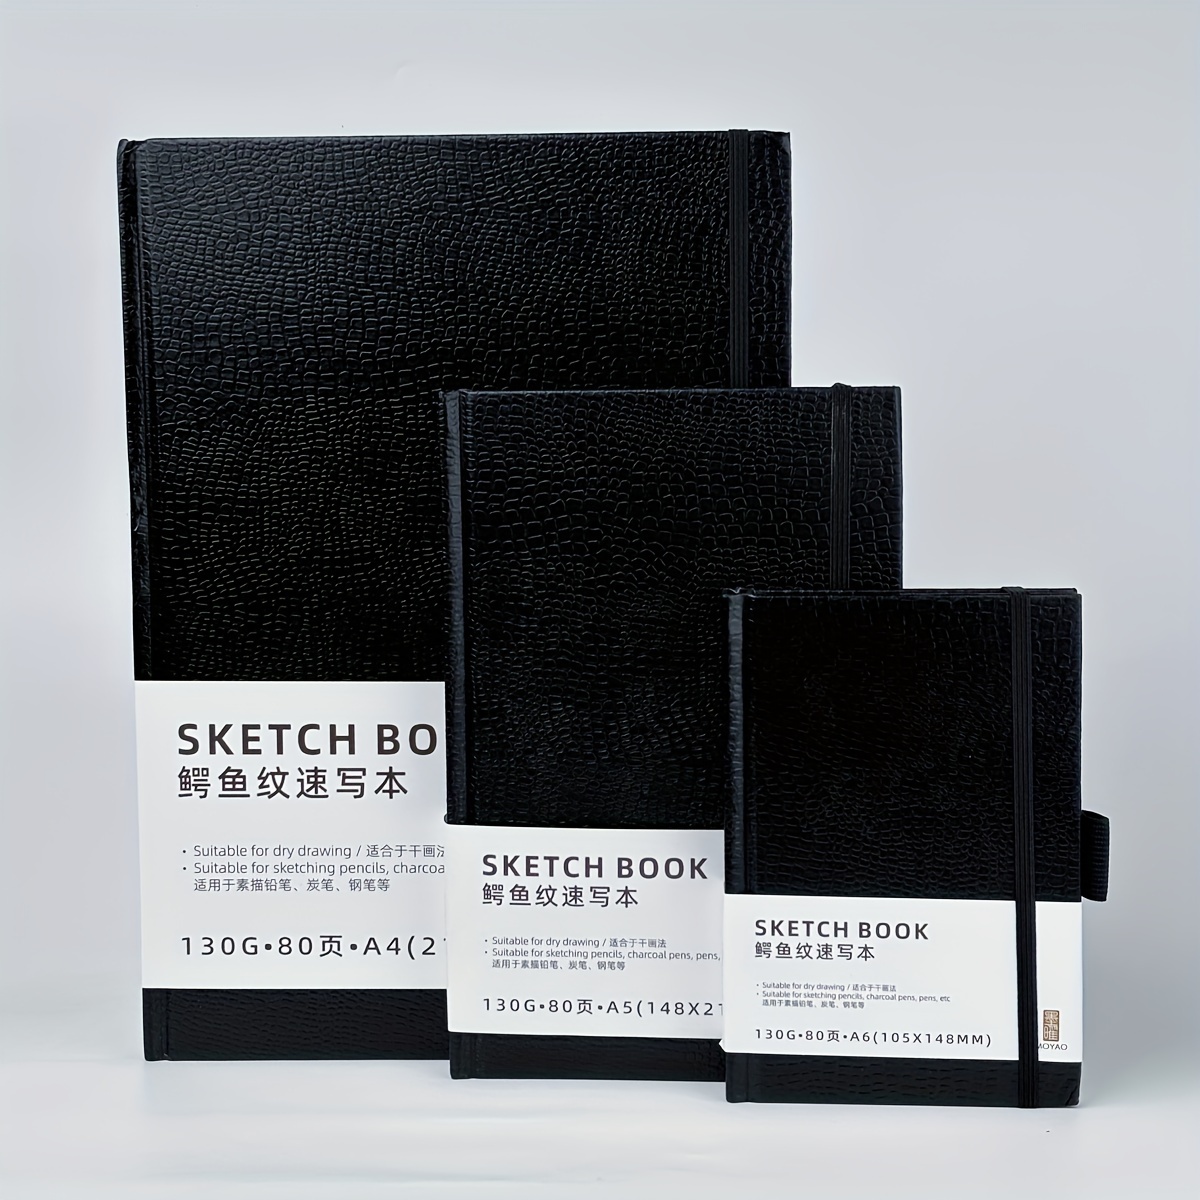  Square 5x5 Bleedproof Marker Paper Pad, 110 GSM Alcohol Ink  Bristol Paper Sketchbook, Handmade Journal Hardbound 88 Sheets (176 Pages)  Markers Ink Mediums Art Sketch Book Gold Pink Family : Arts, Crafts & Sewing